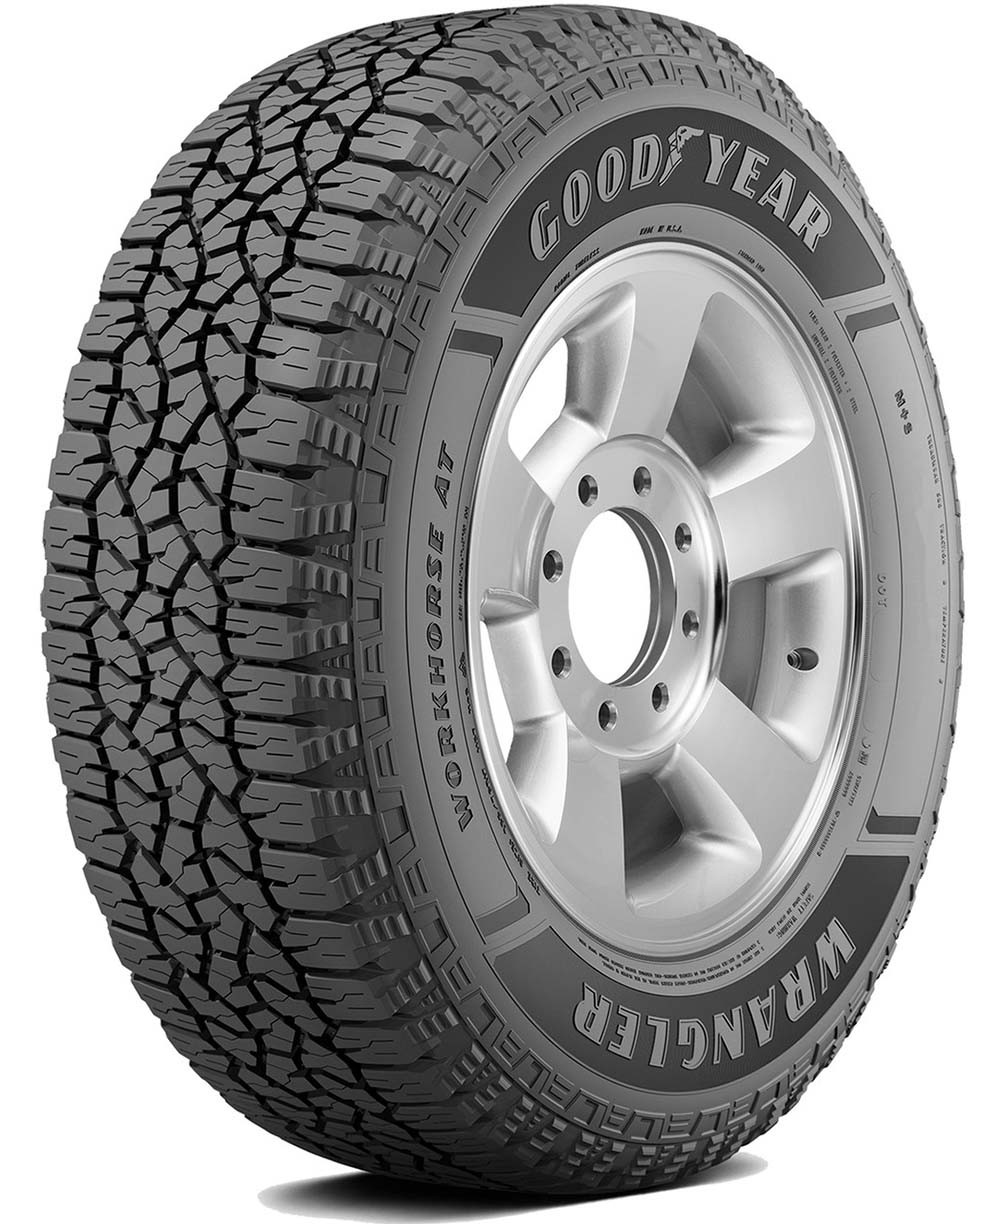 GOODYEAR Wrangler Workhorse AT P255/70R16 115T